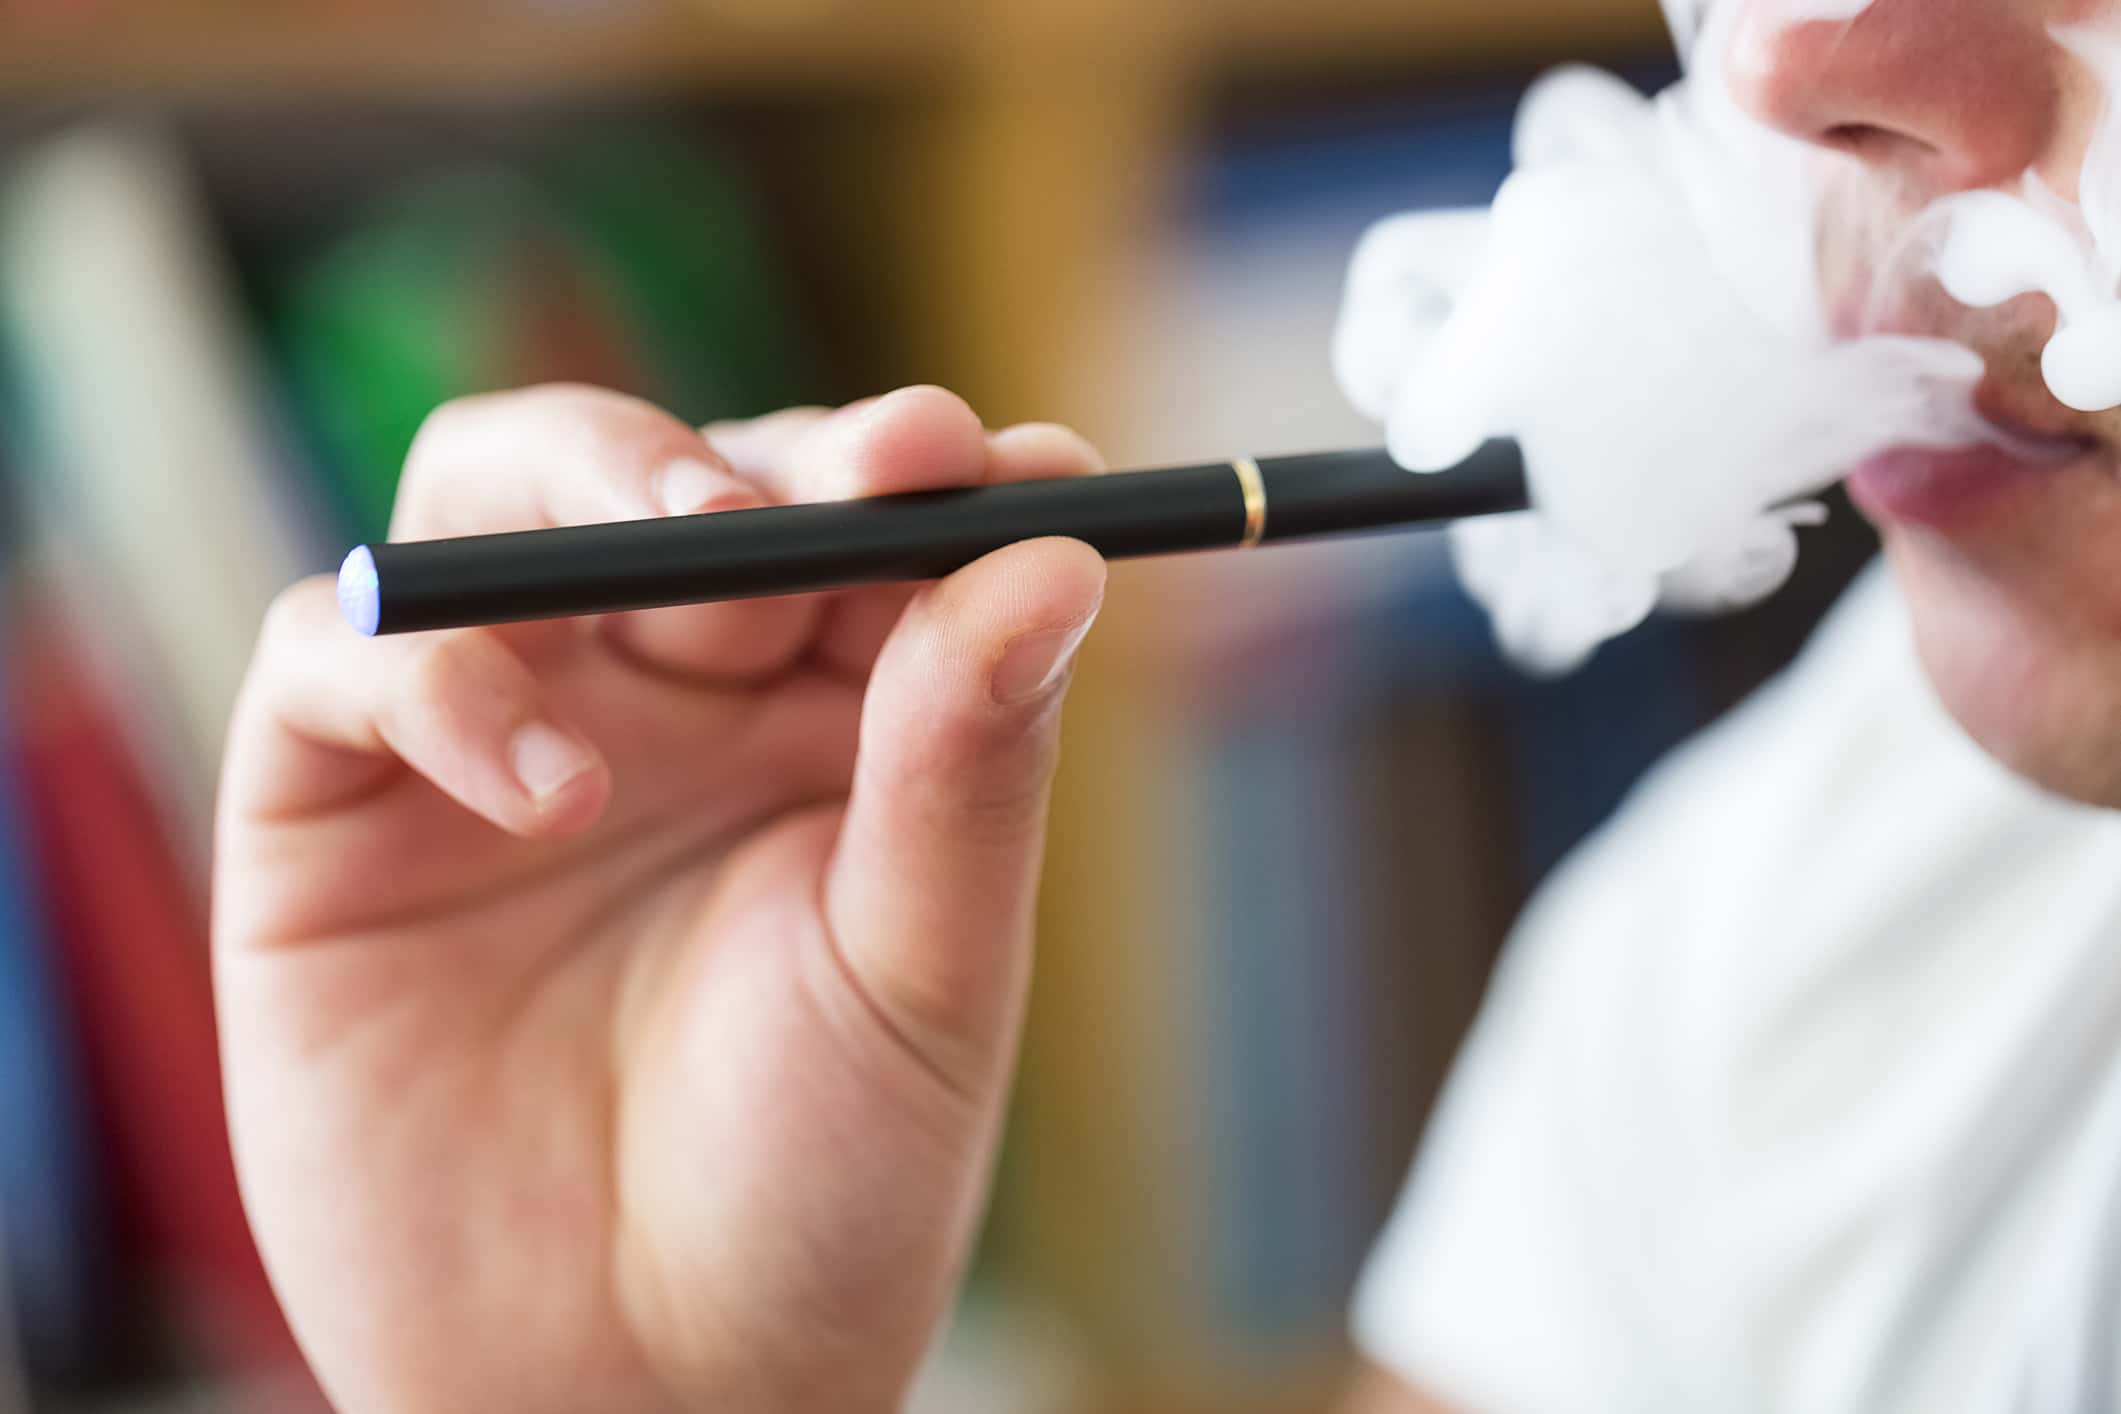 Budget Includes 15% Vape Tax, Indiana's First on E-Cigarettes